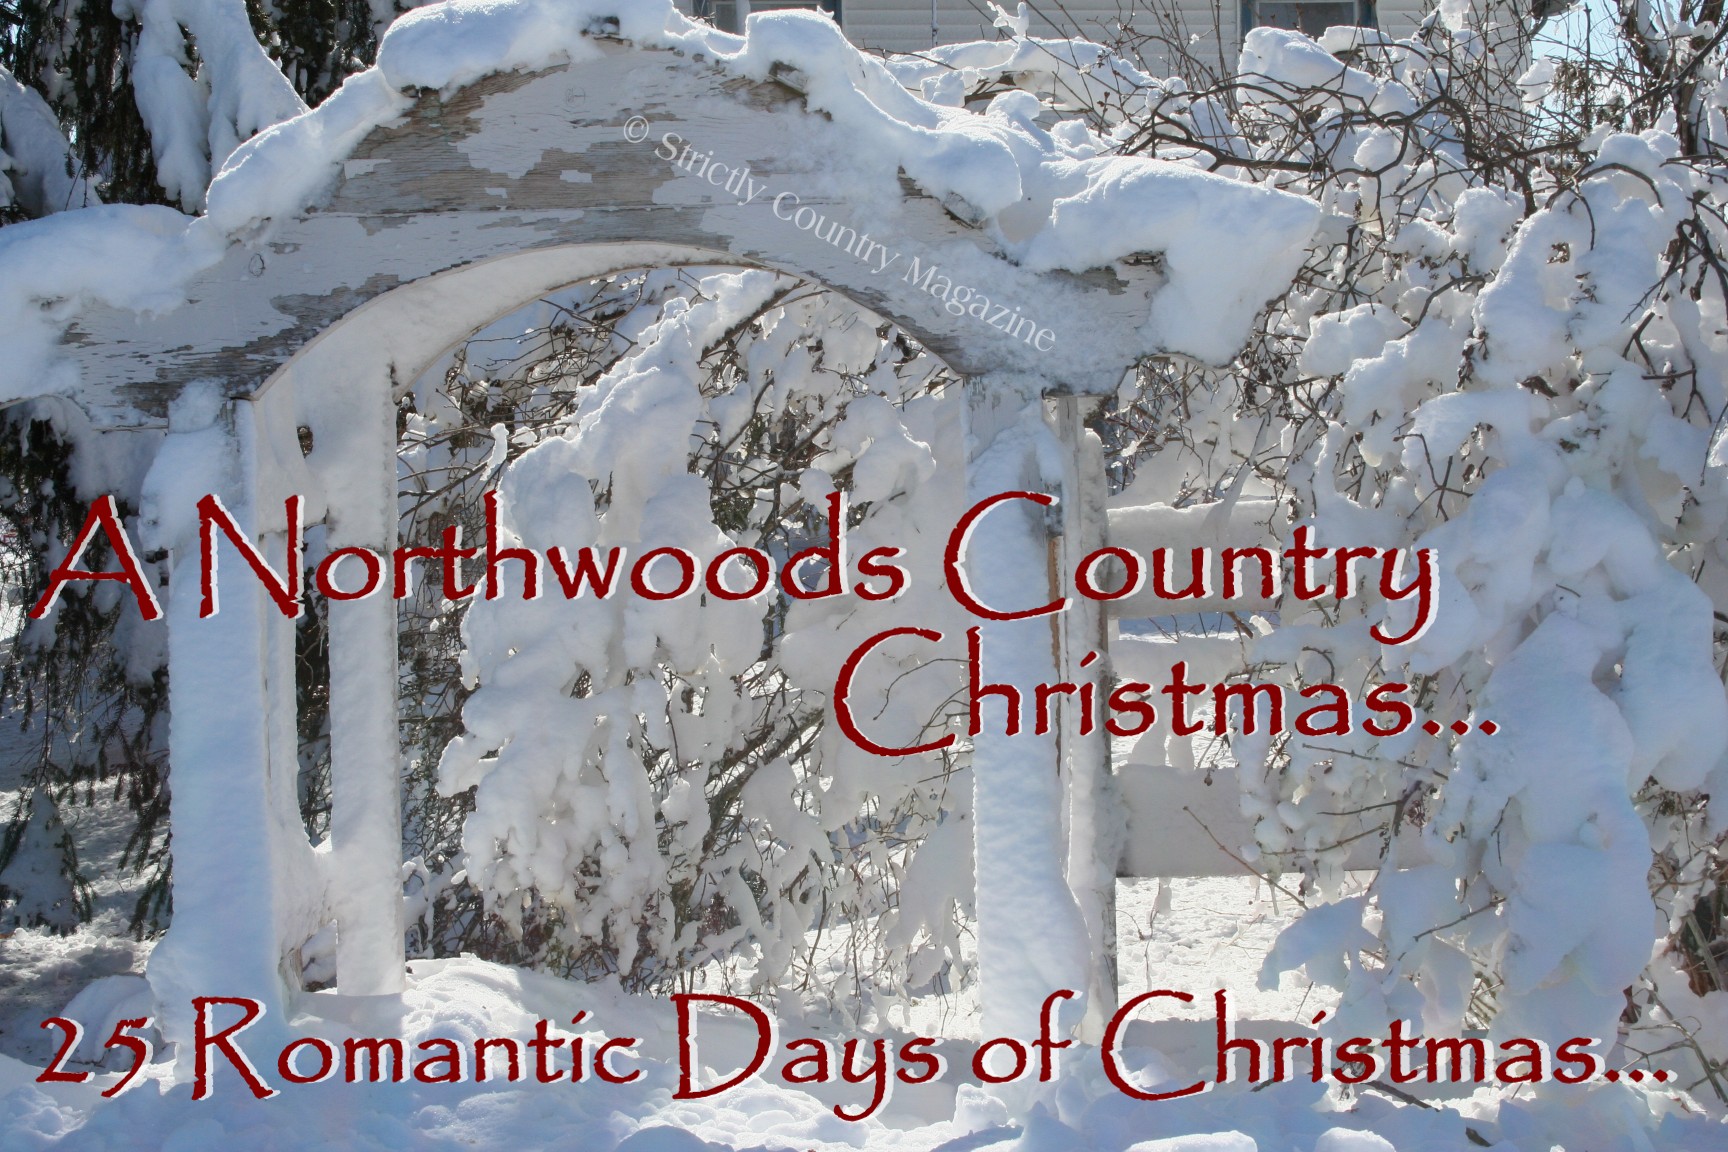 Strictly Country Magazine Copyright A Northwoods Country Christmas 25 Romantic Days of Christmas title